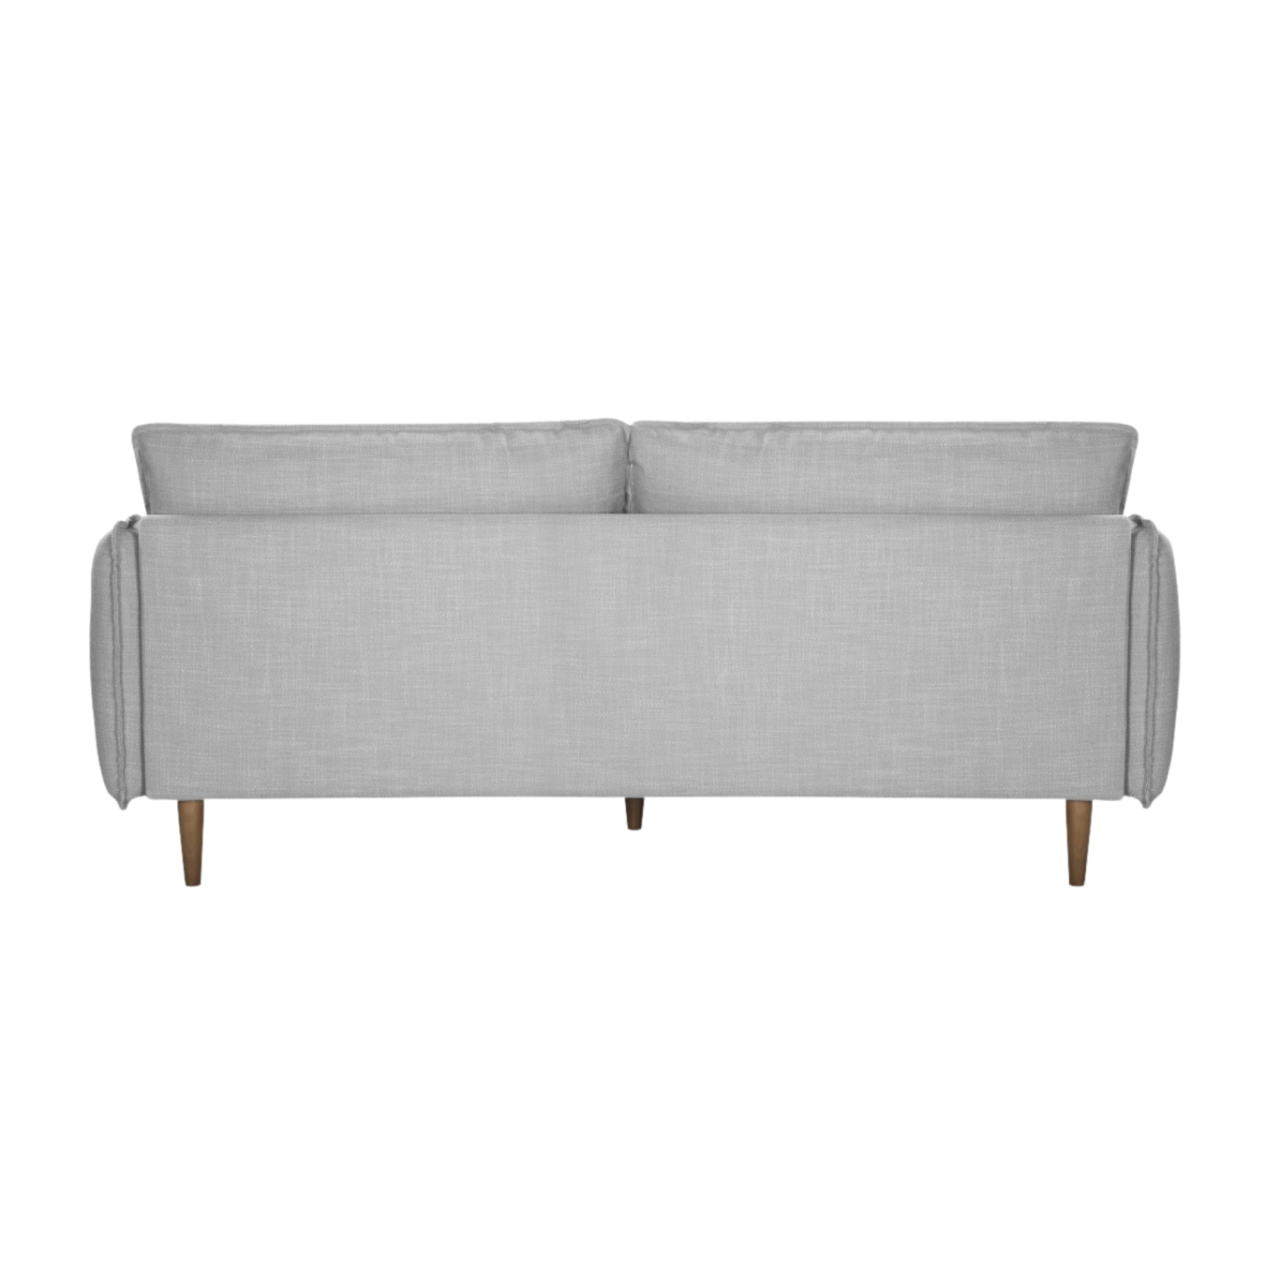 back view of modern comfy 3 seater sofa upholstered in grey linen fabric